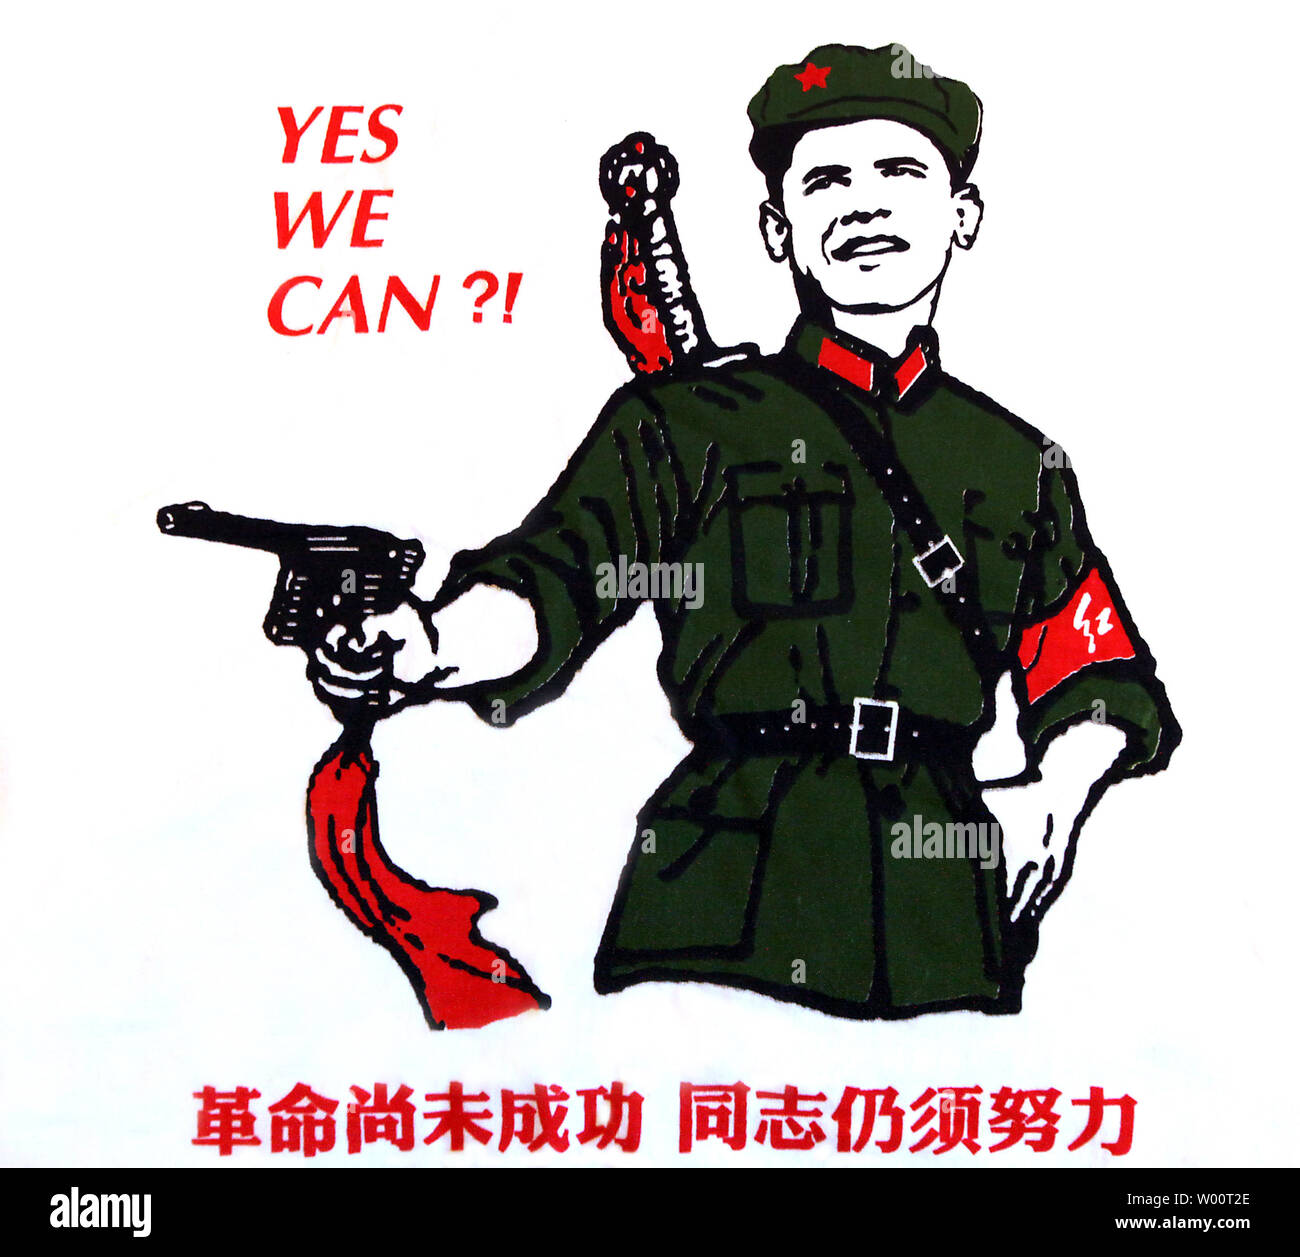 T-shirts featuring U.S. President Barack Obama dressed in the Red Army communist fatigues of China's former helmsman Chairman Mao Zedong are being sold in shops in Beijing, September 14, 2010.  'Oba-Mao' t-shirts and accessories are big sellers in Beijing due to Obama's unflagging popularity among many Chinese.    UPI/Stephen Shaver Stock Photo